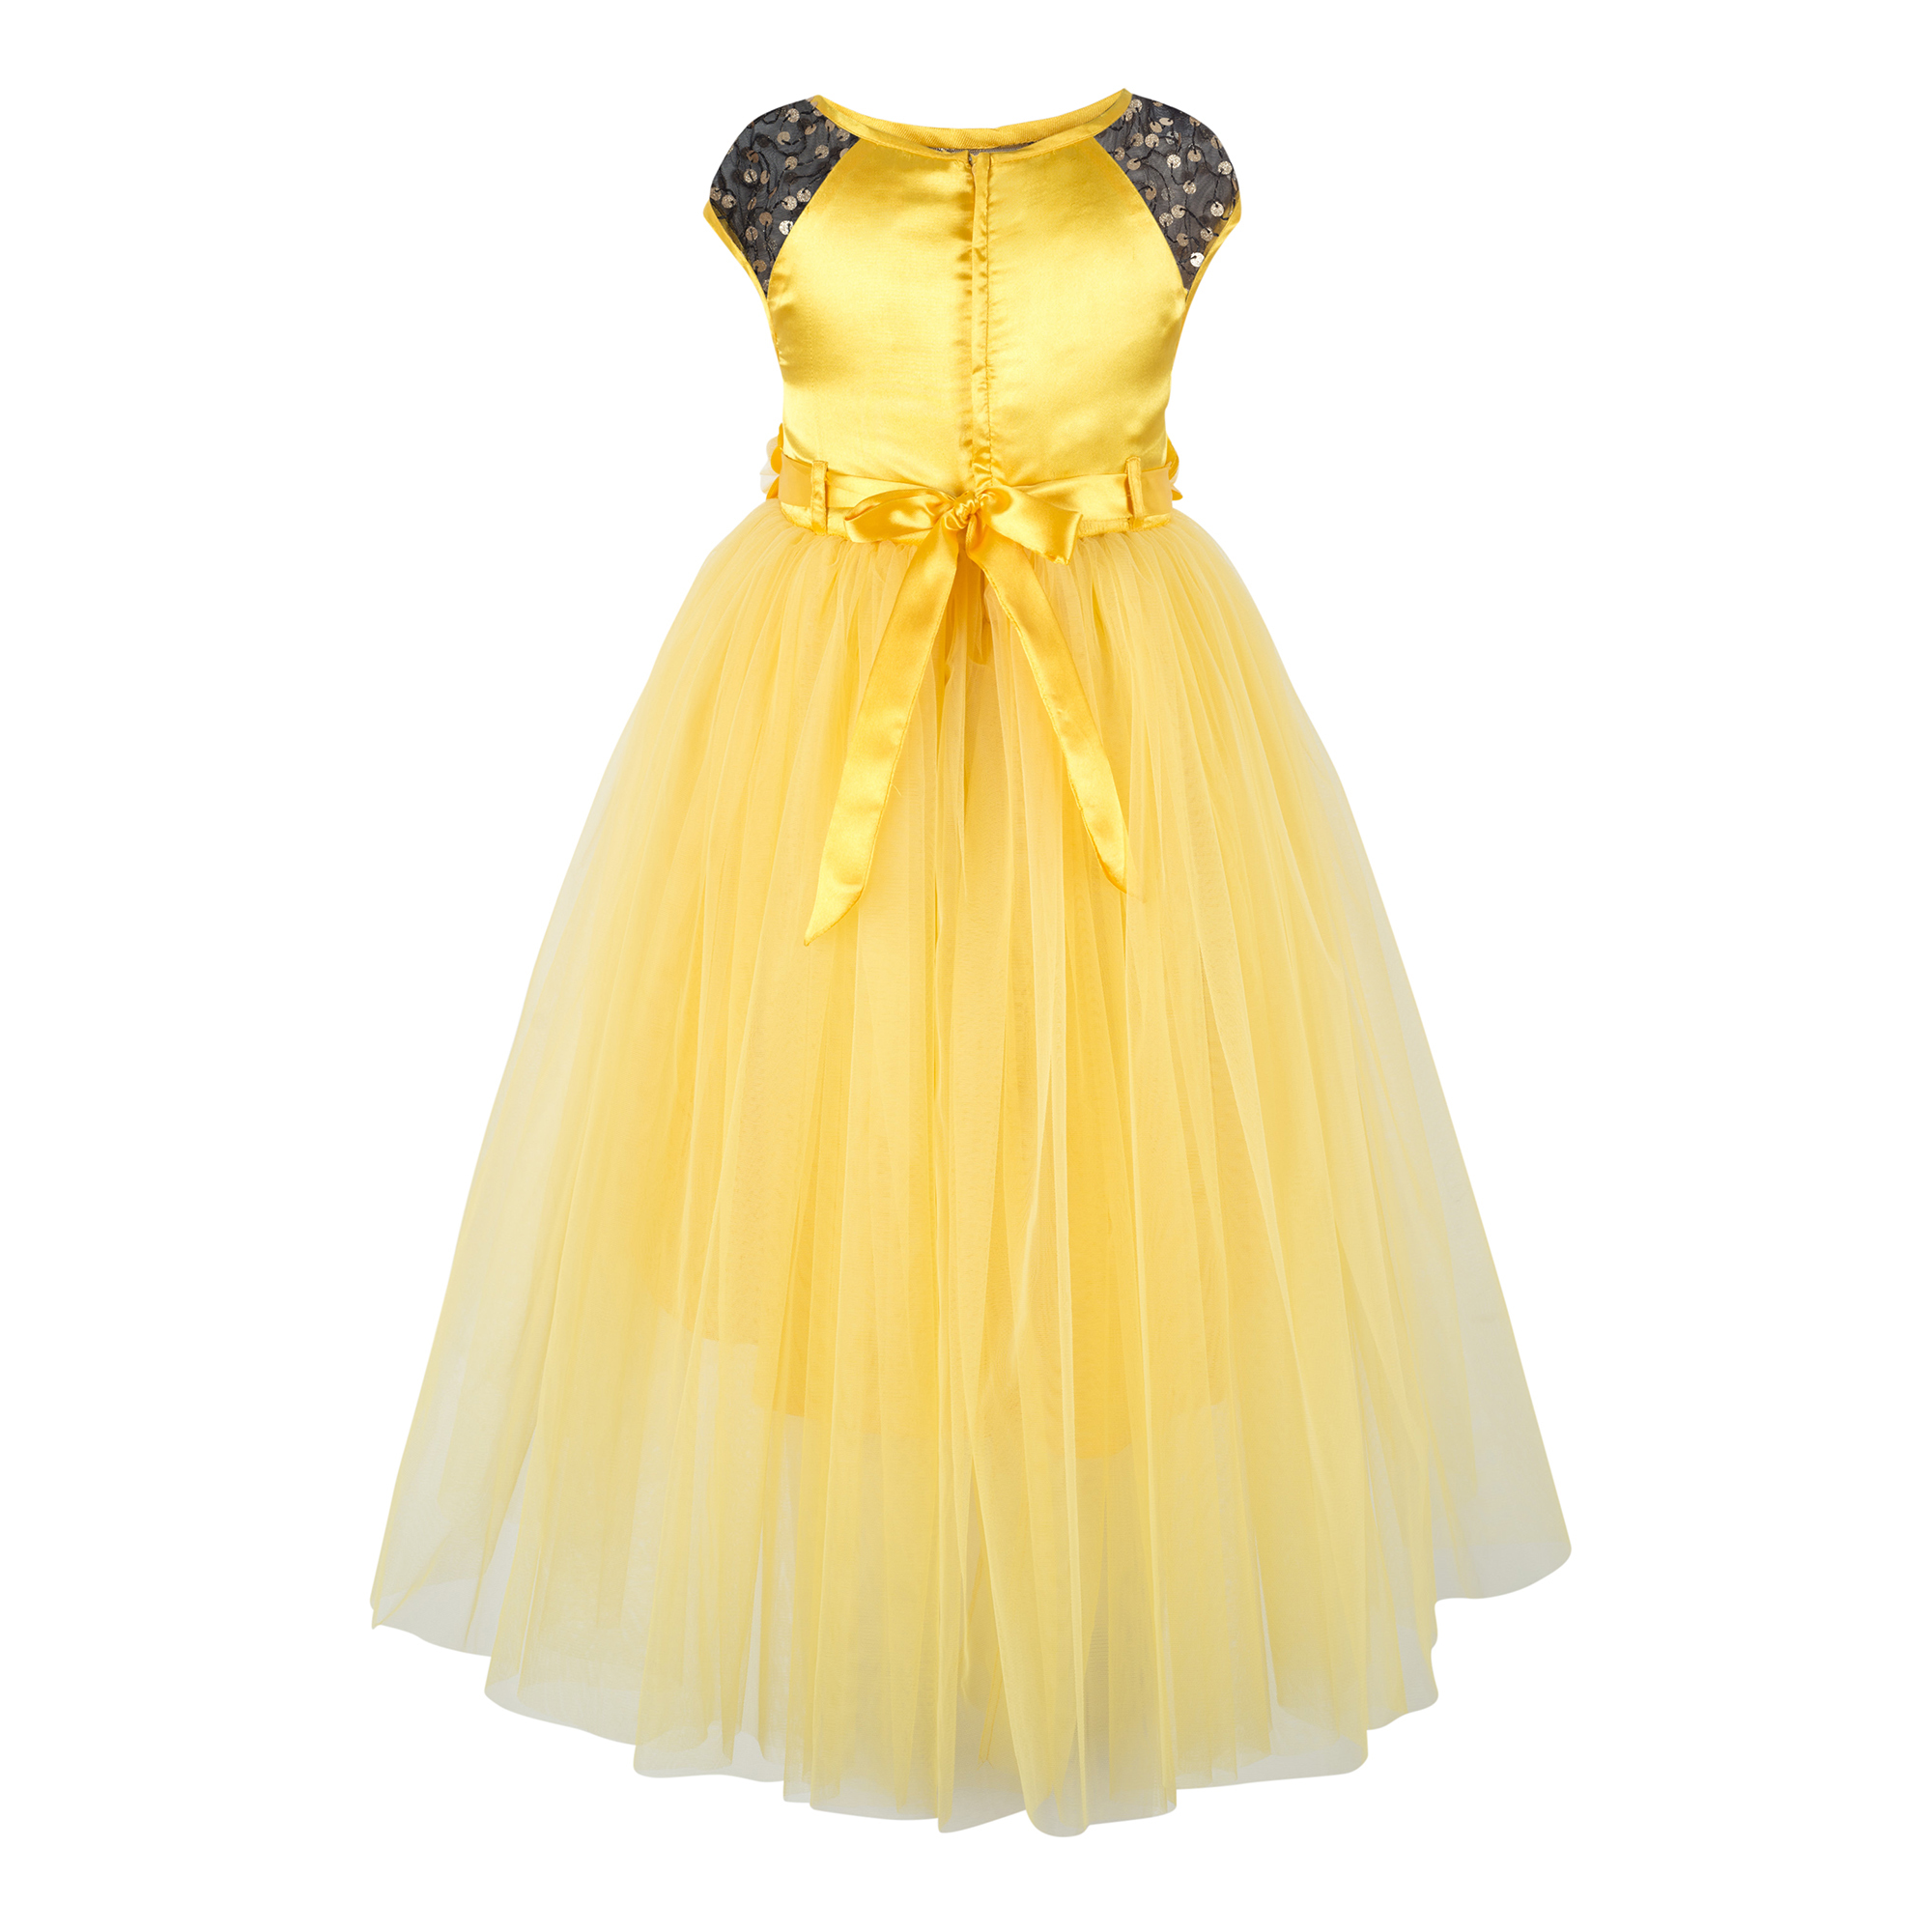 Sequins Embellished Yellow Dress.